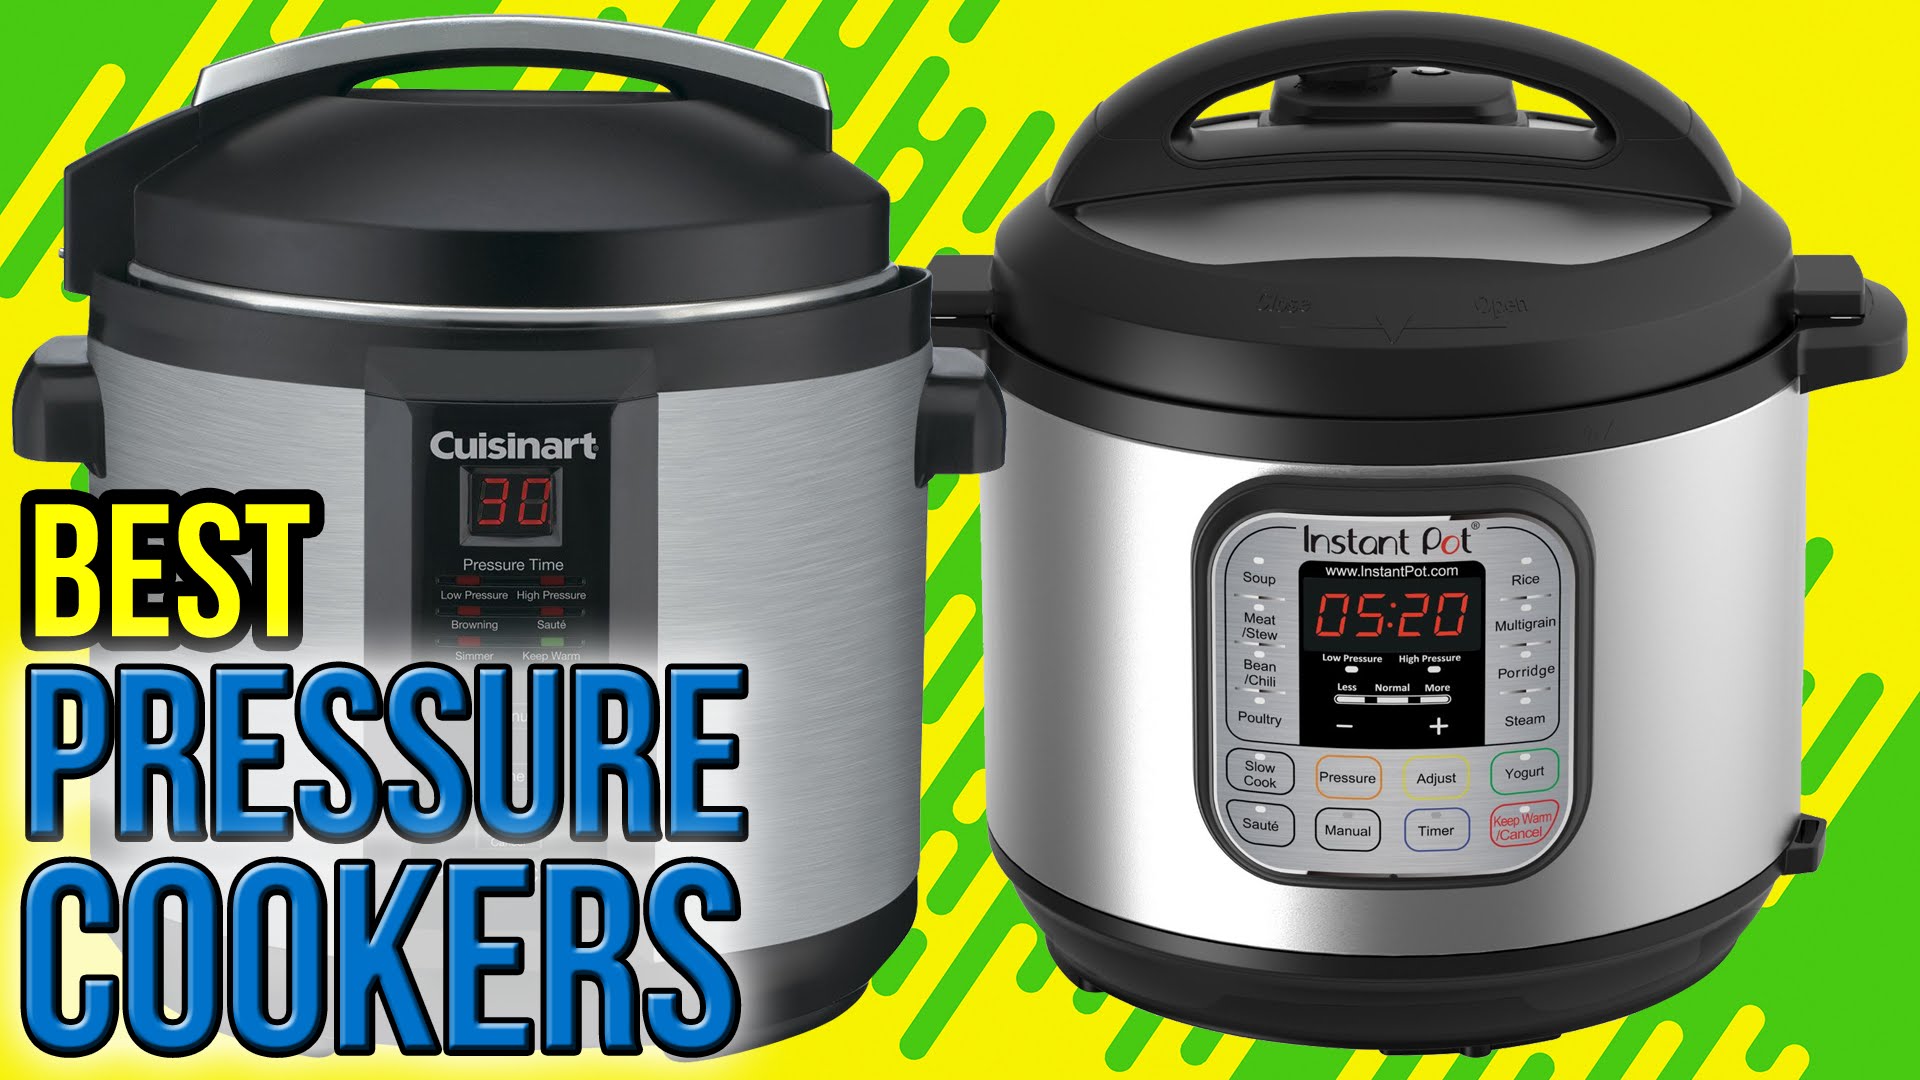 10 Best Pressure Cookers - 2017 - Self-Reliance Central